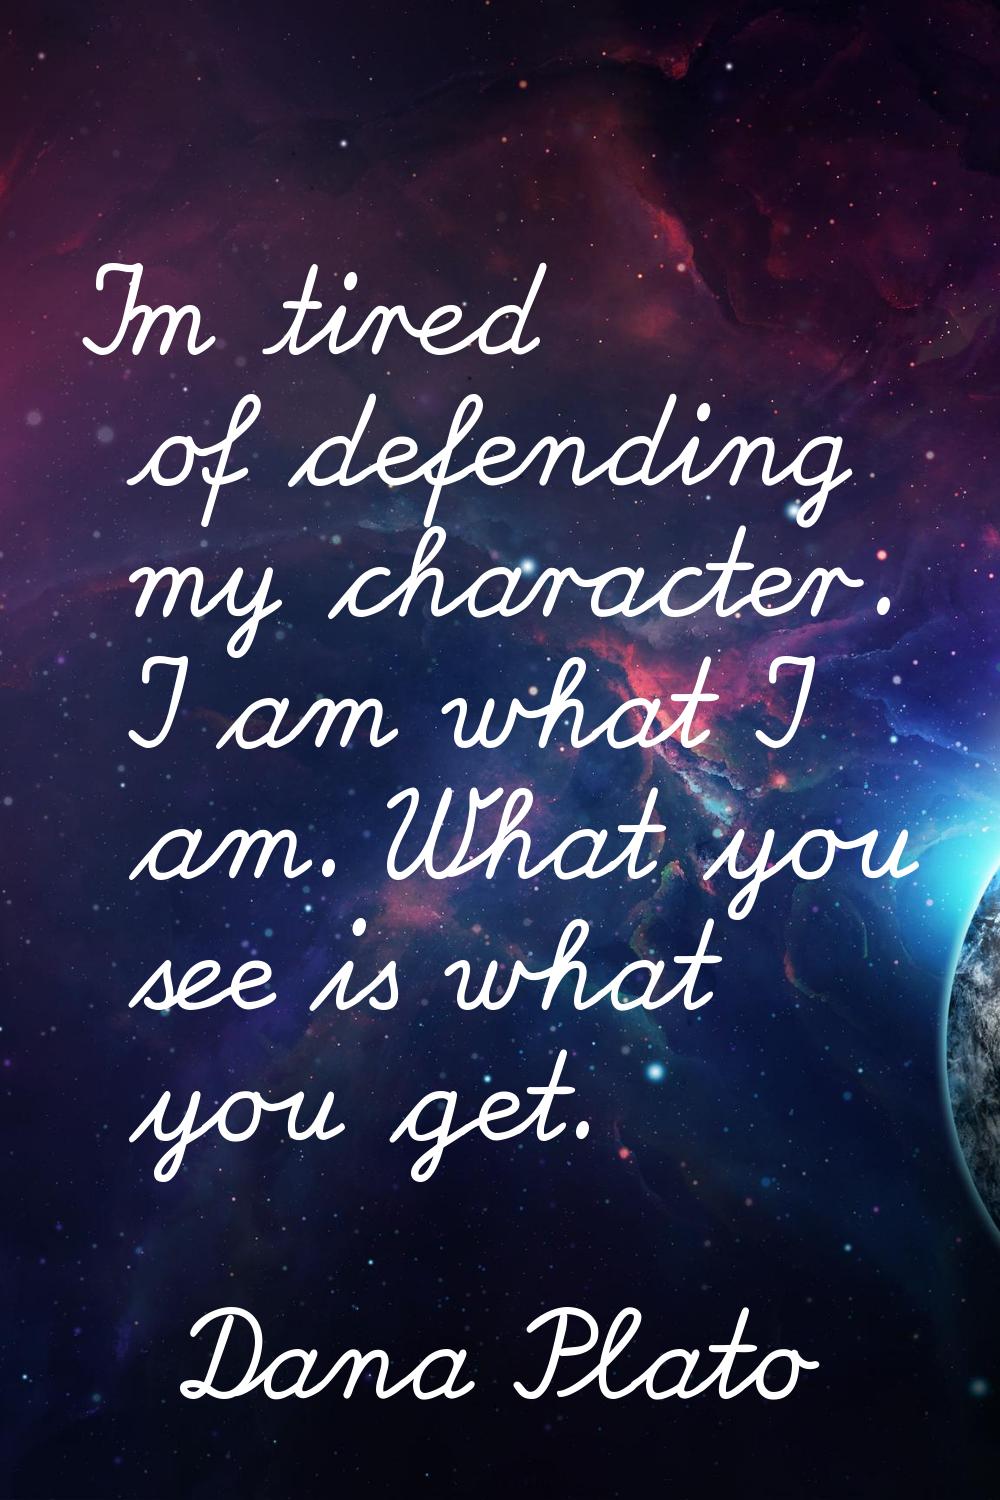 I'm tired of defending my character. I am what I am. What you see is what you get.